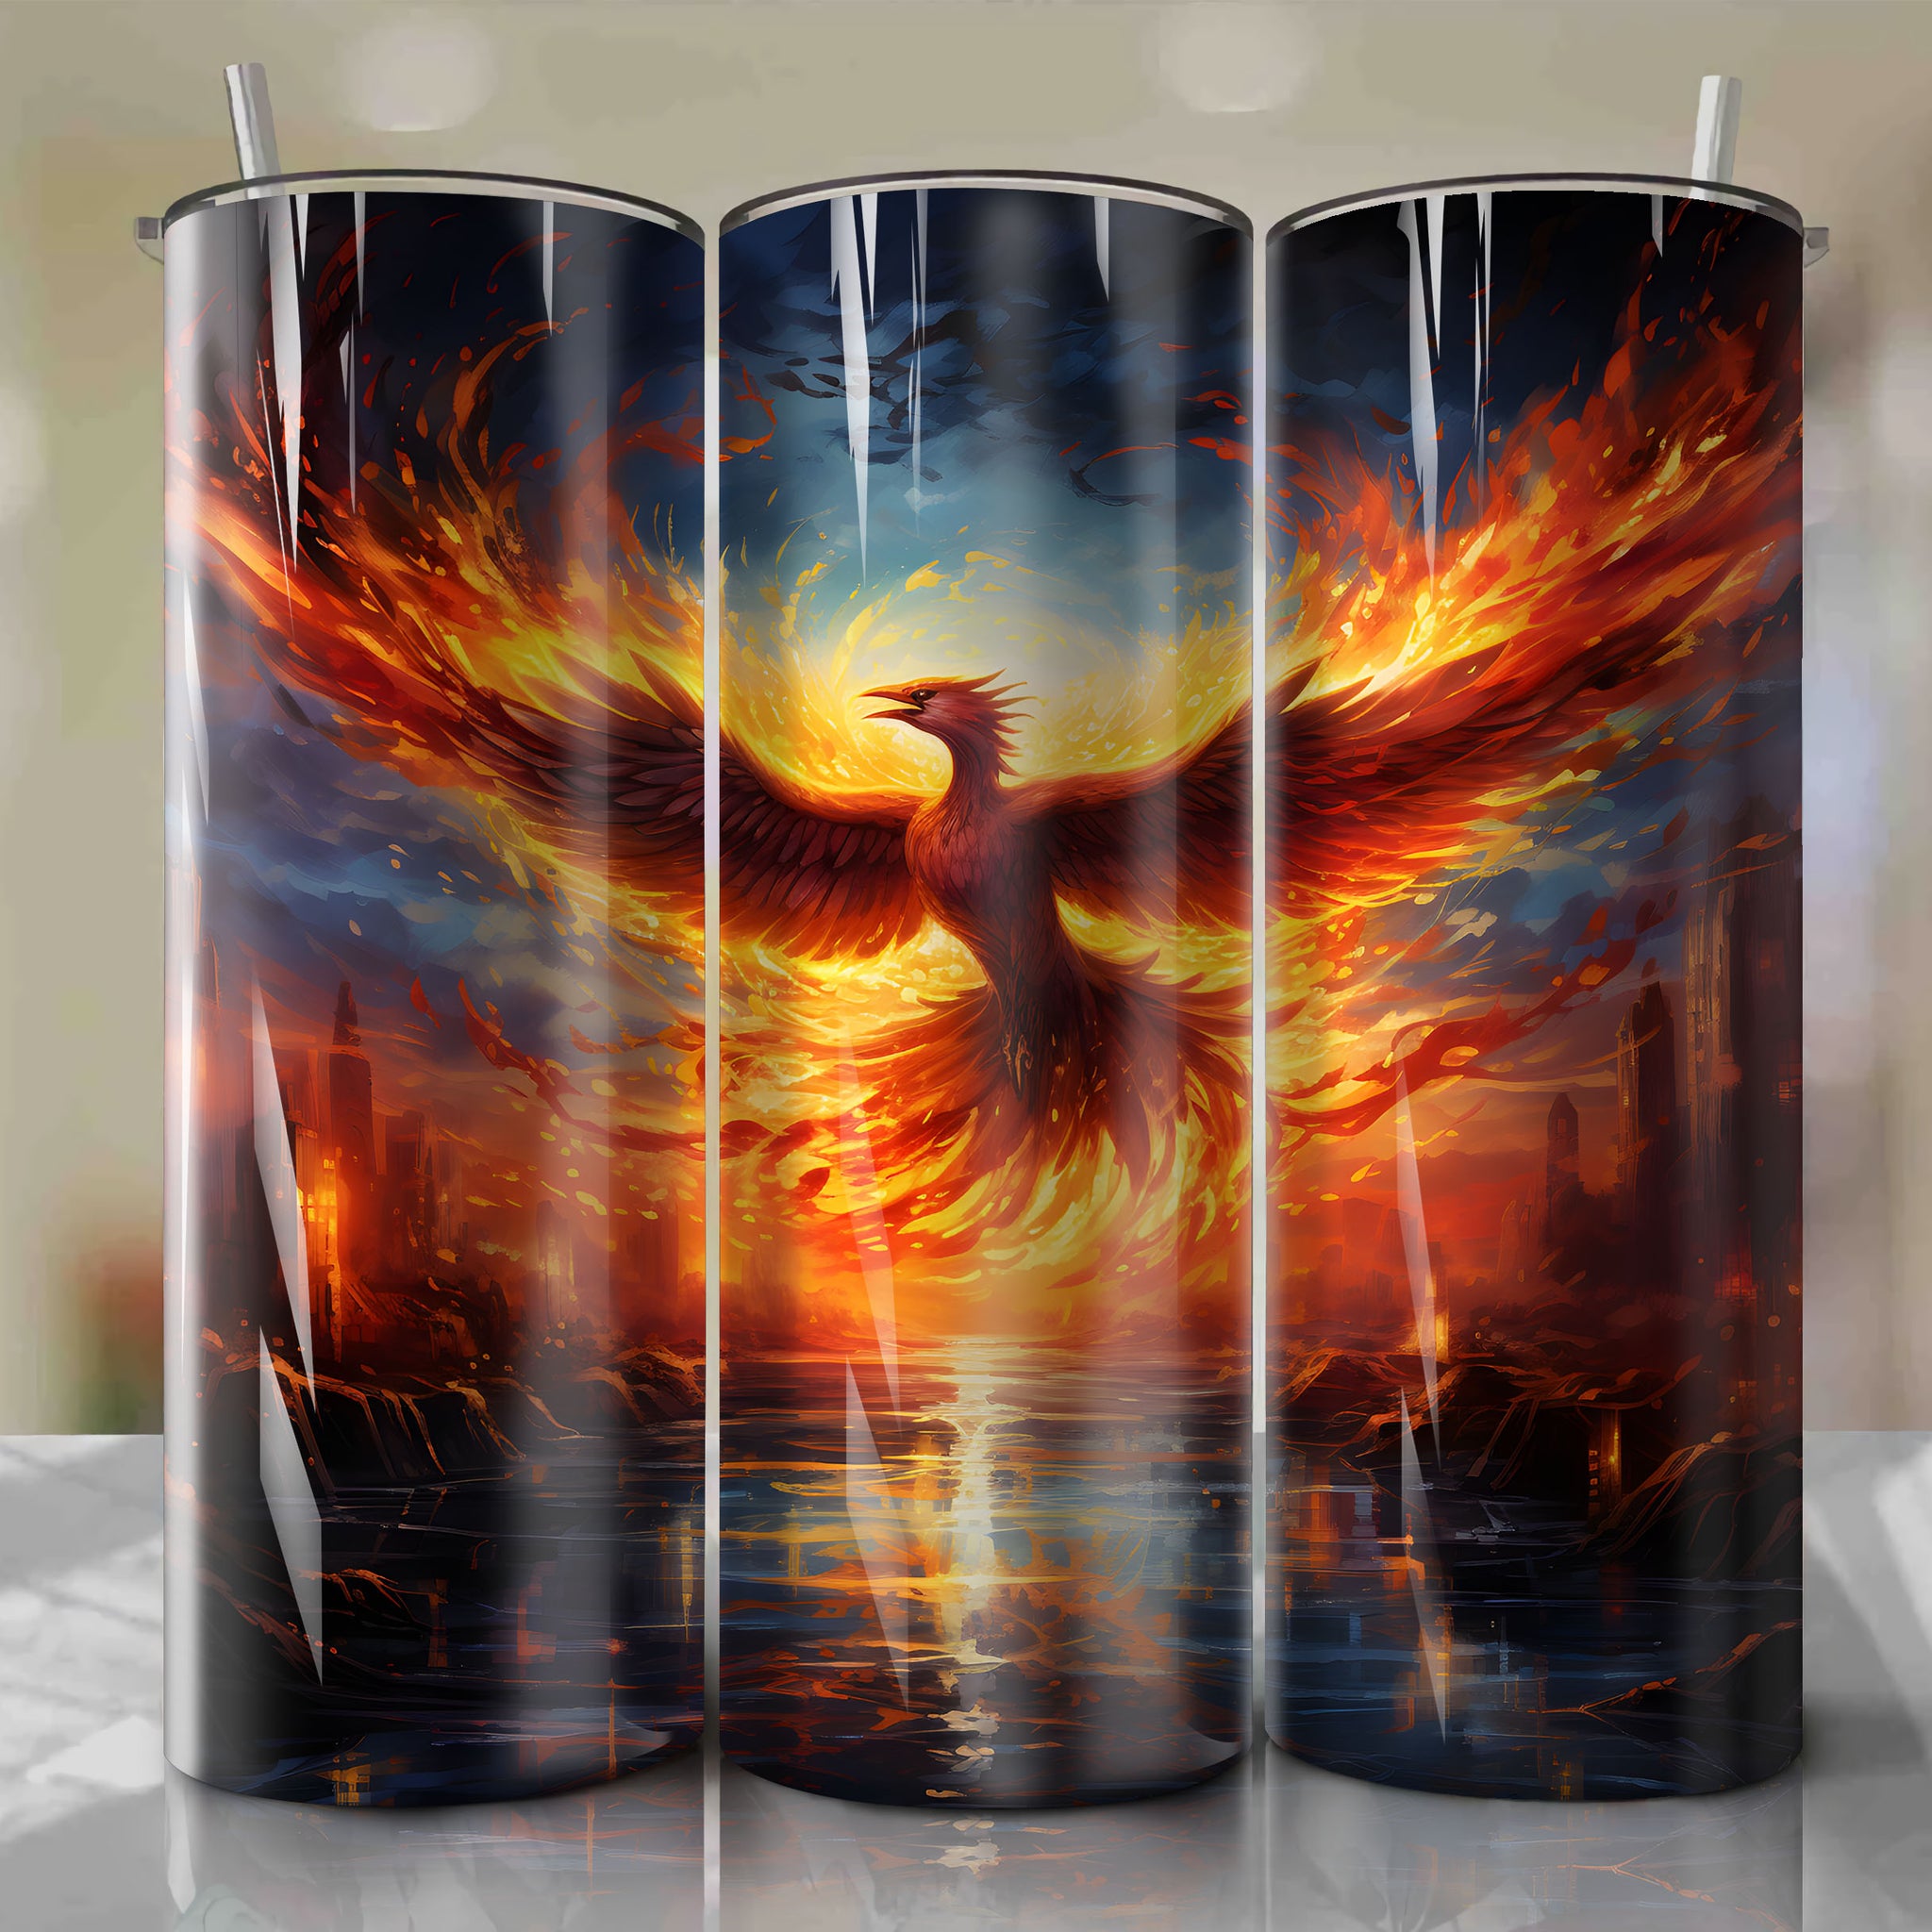 20 Oz Tumbler Wrap - A Stunning Artistic Digital Painting Capturing the Essence of Moltres
